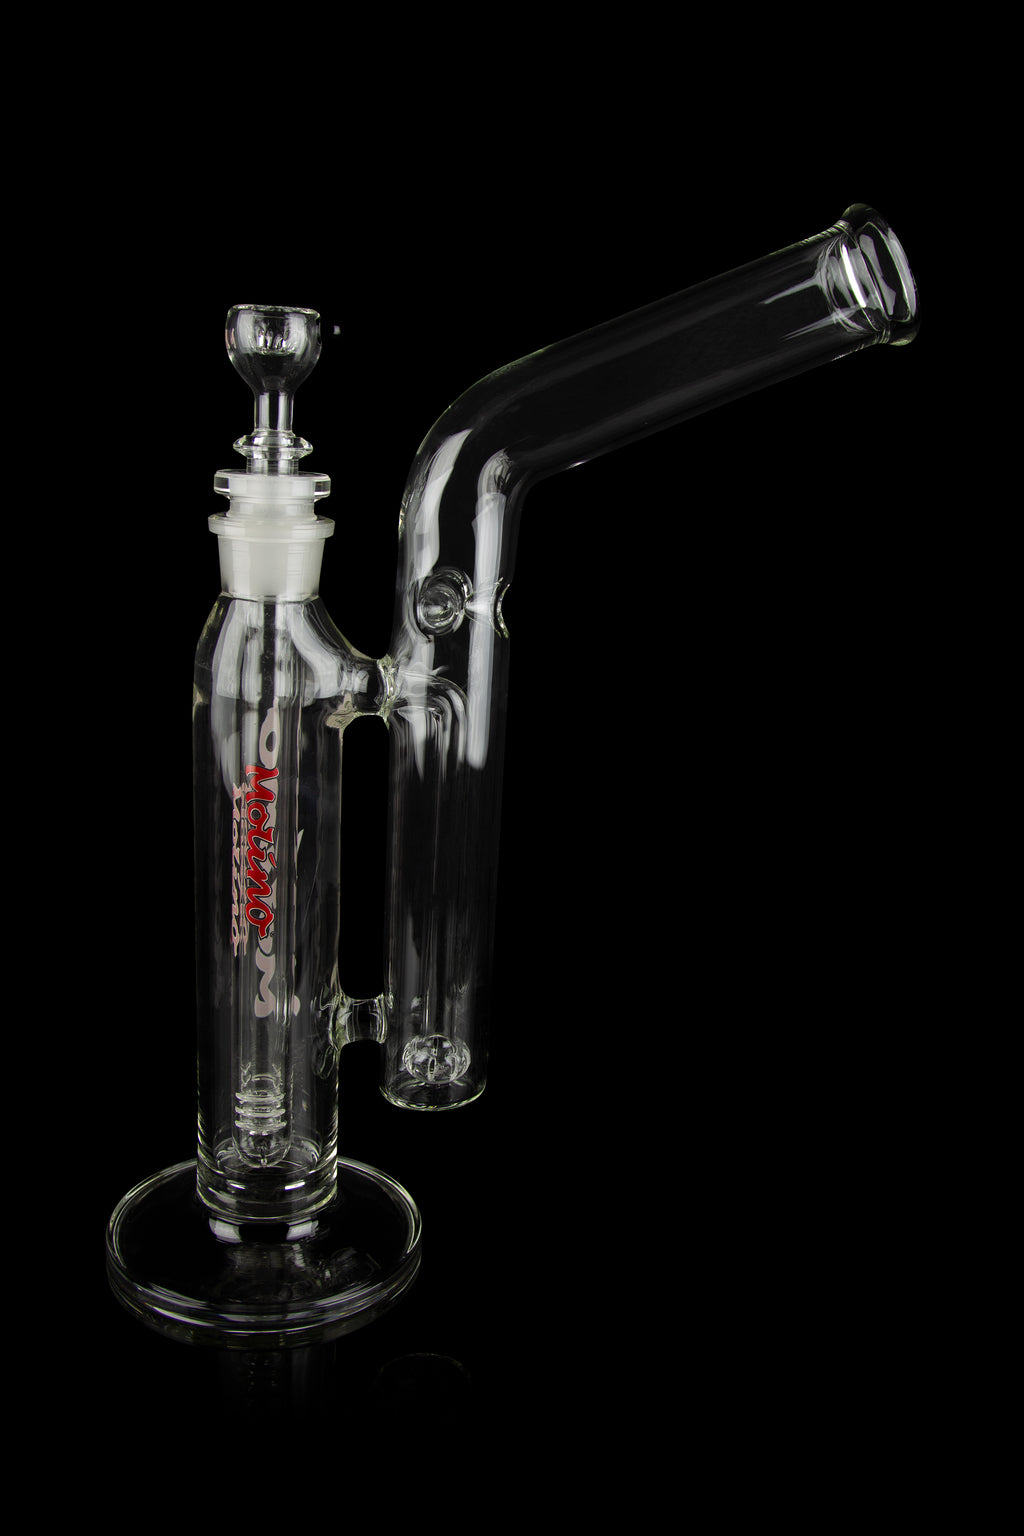 Stainless Steel Dabber - Dab Accessories - Molino Glass Bongs